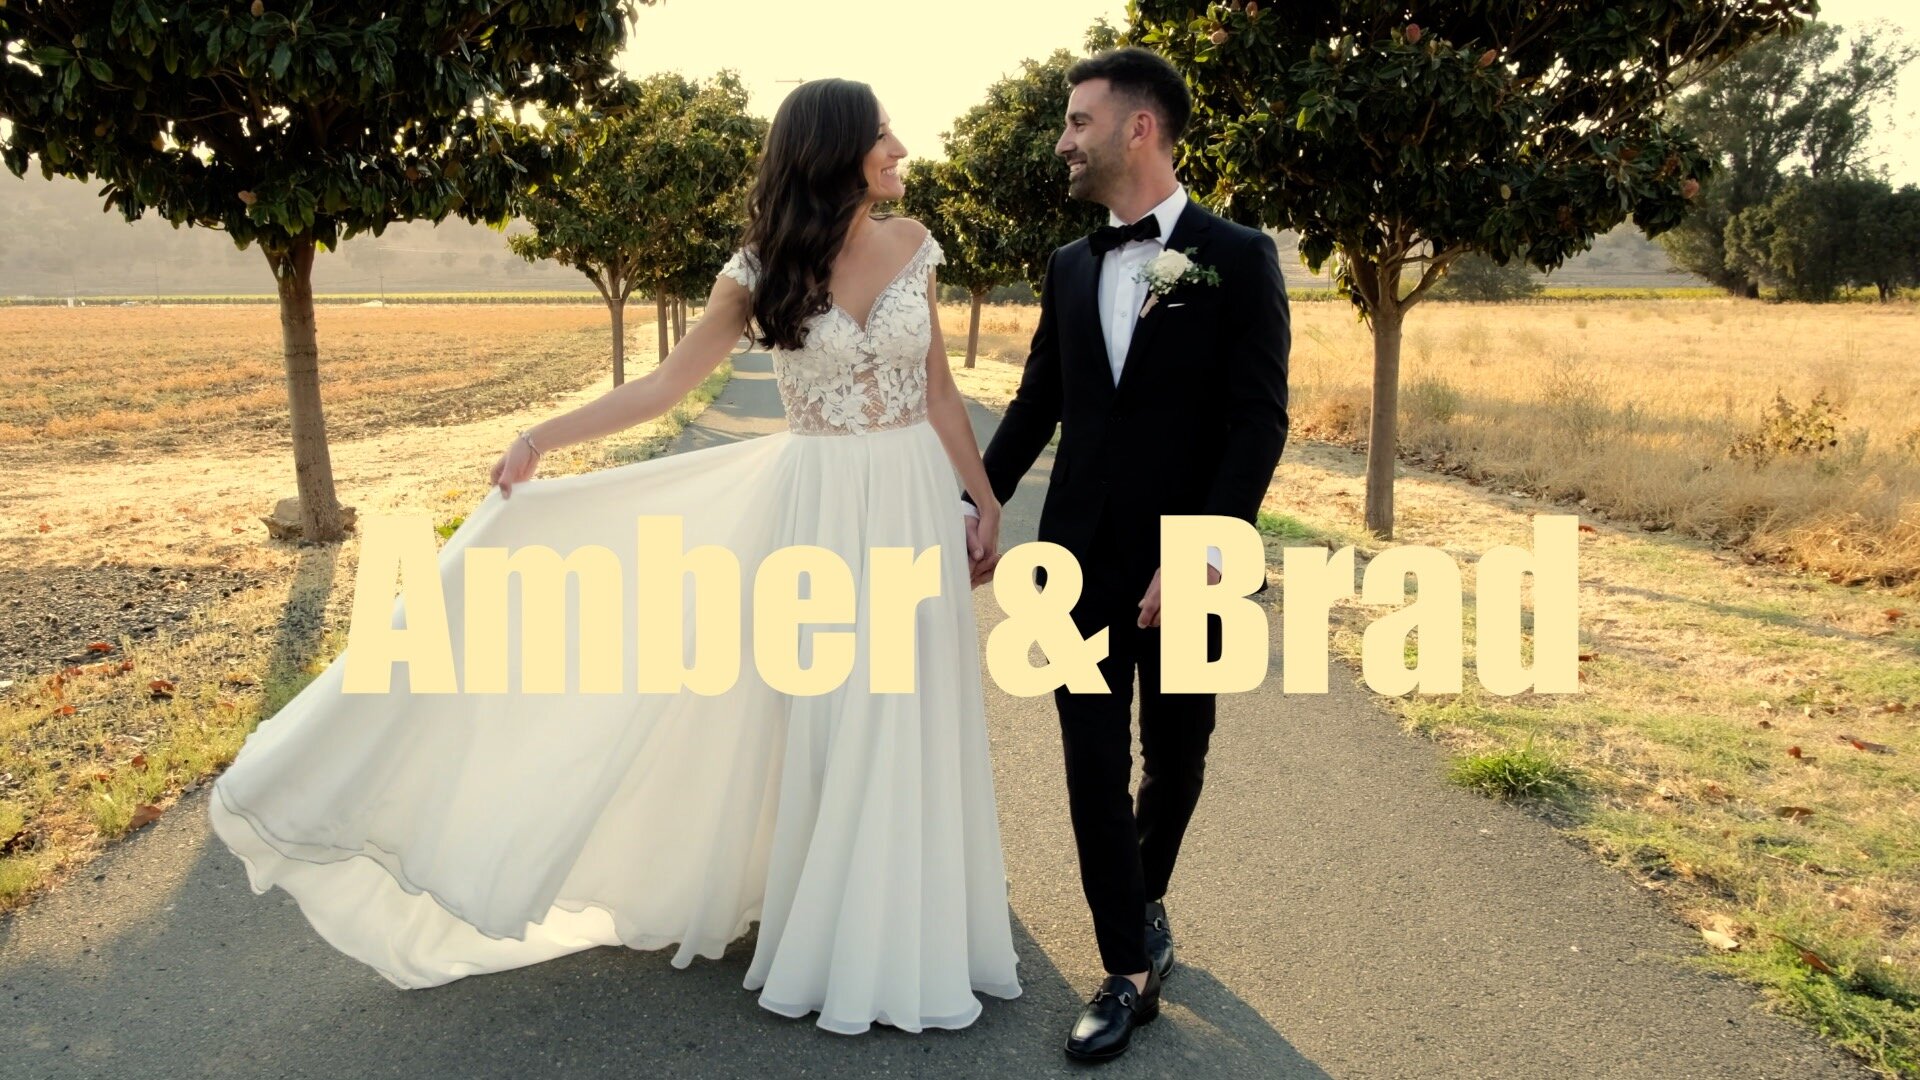  Amber and Brad - A wedding at  the Suisun Valley Inn  in the heart of Suisun Valley, just east of Napa. 